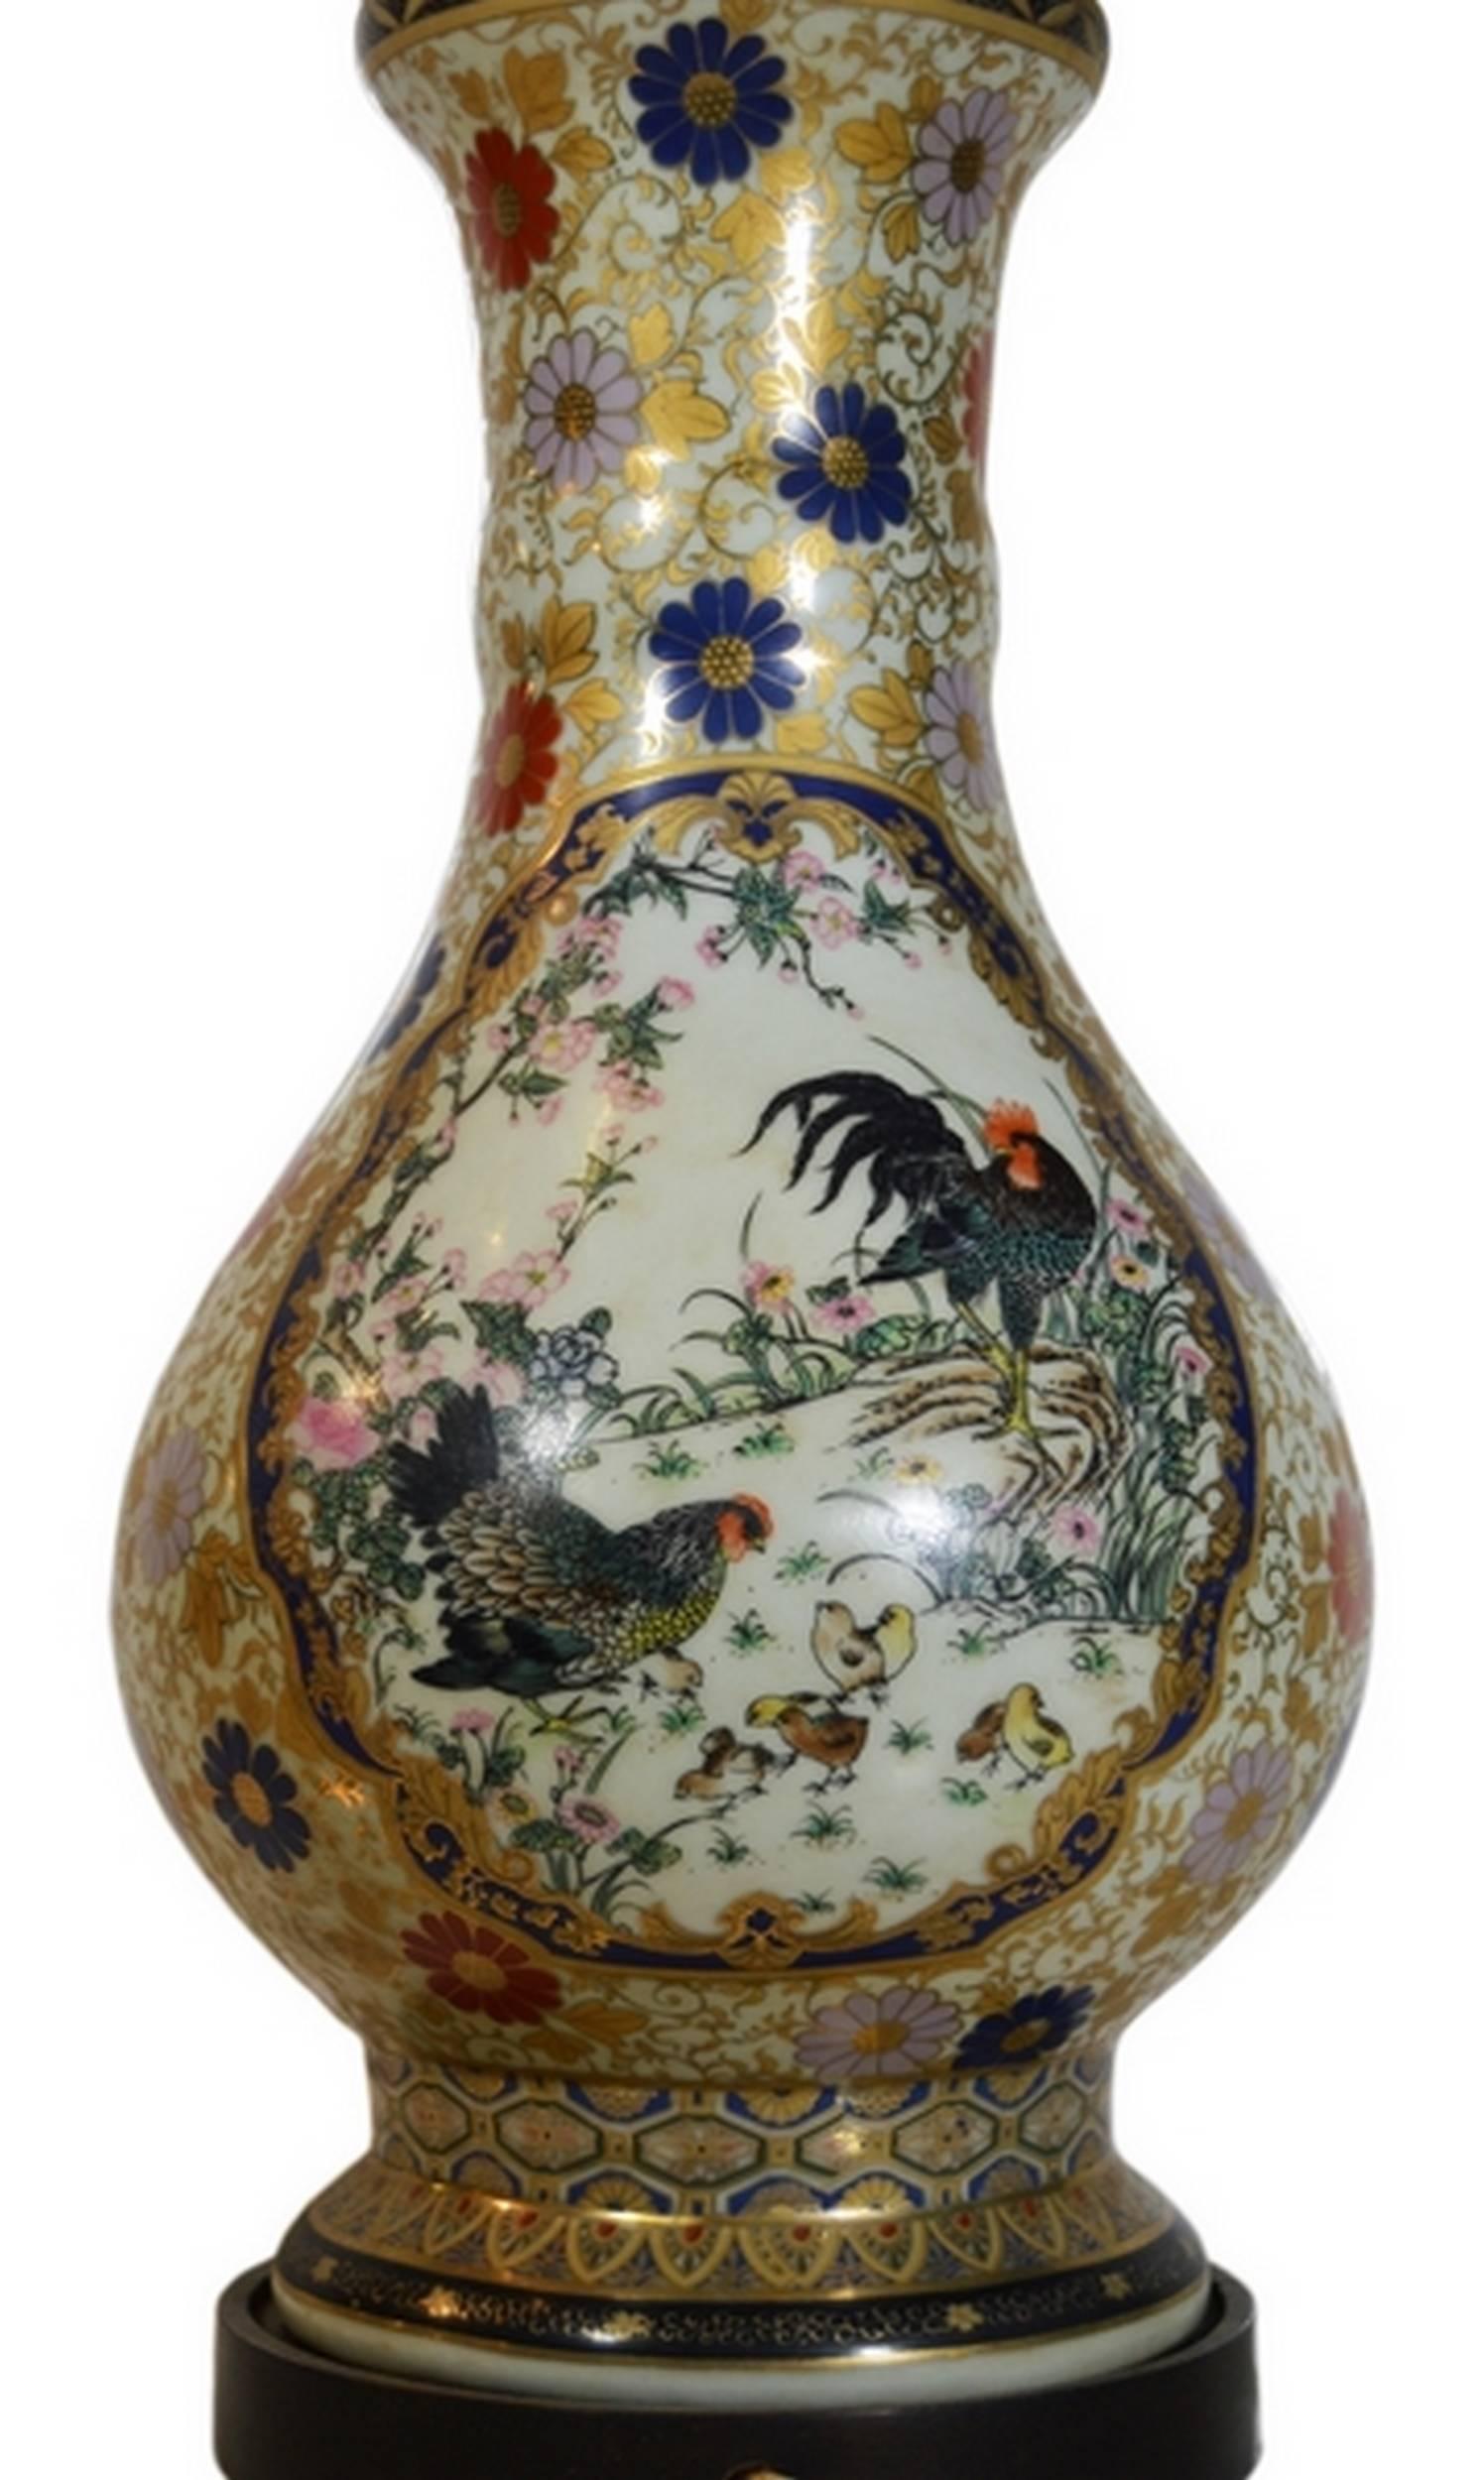 A vintage Chinese tall lamp with hand-painted designs on porcelain. This lamp adopts a classic Chinese vase shape. The lamp is covered by adornments such as golden foliages and blue, red and pink flowers. A blue frame on the belly contains a flower